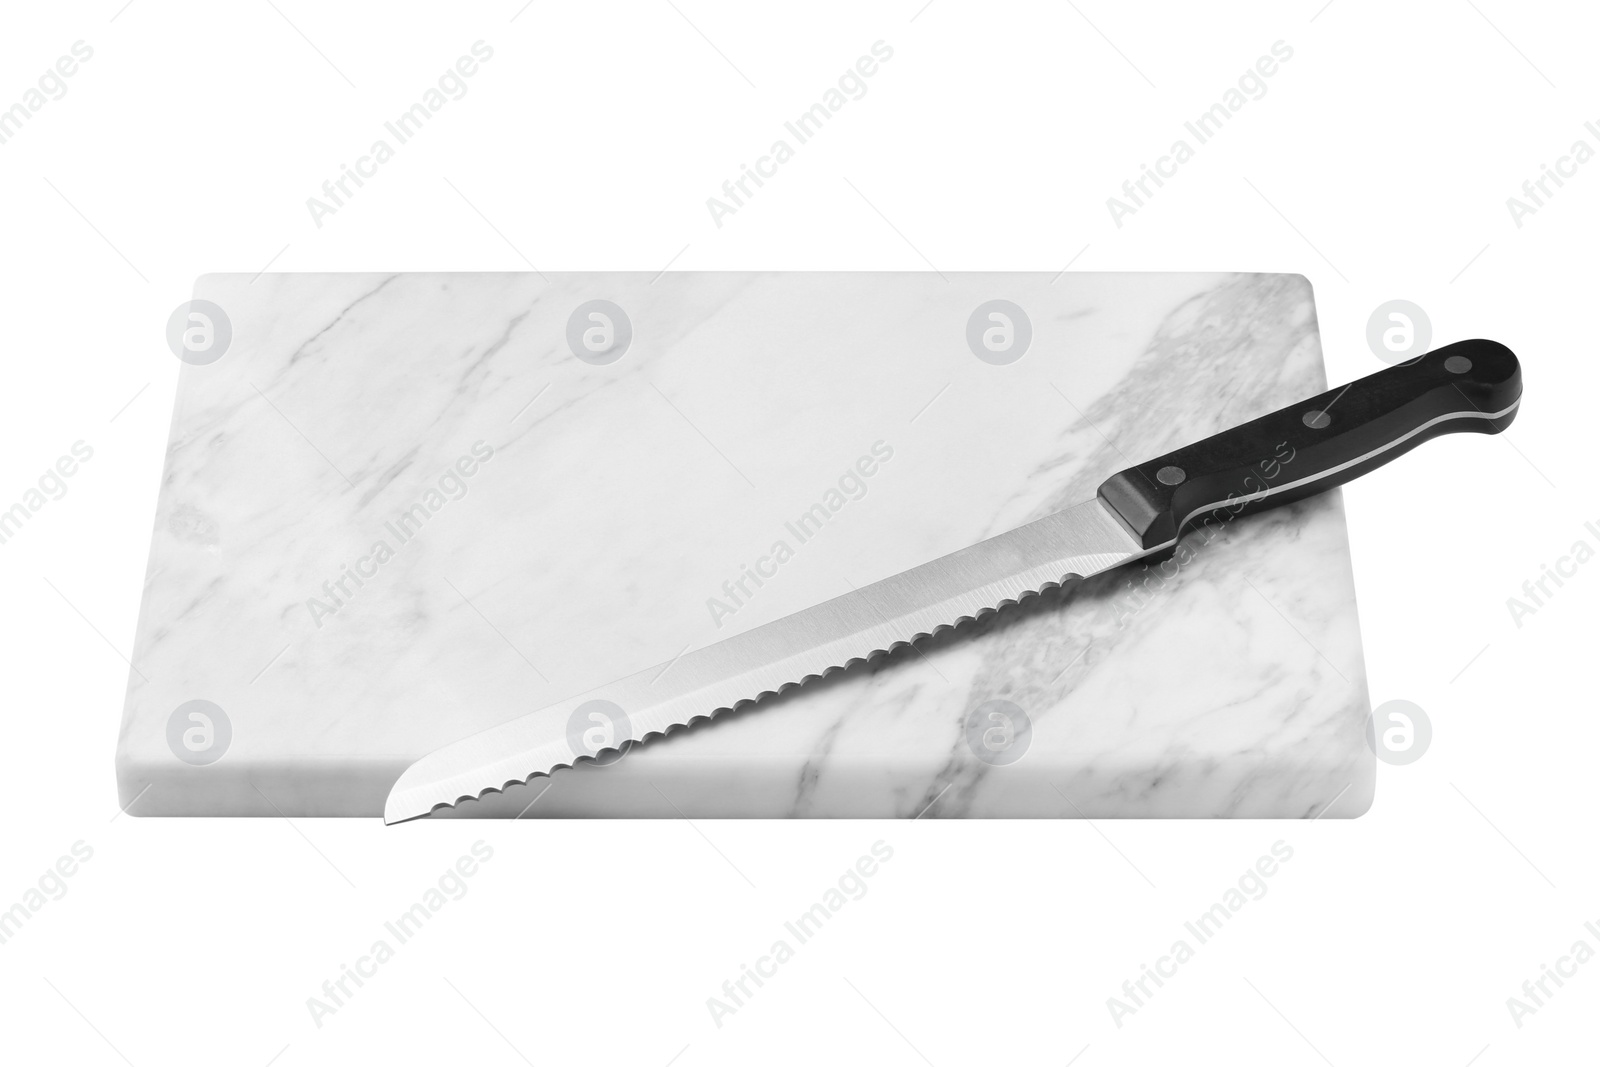 Photo of Bread knife and marble board isolated on white